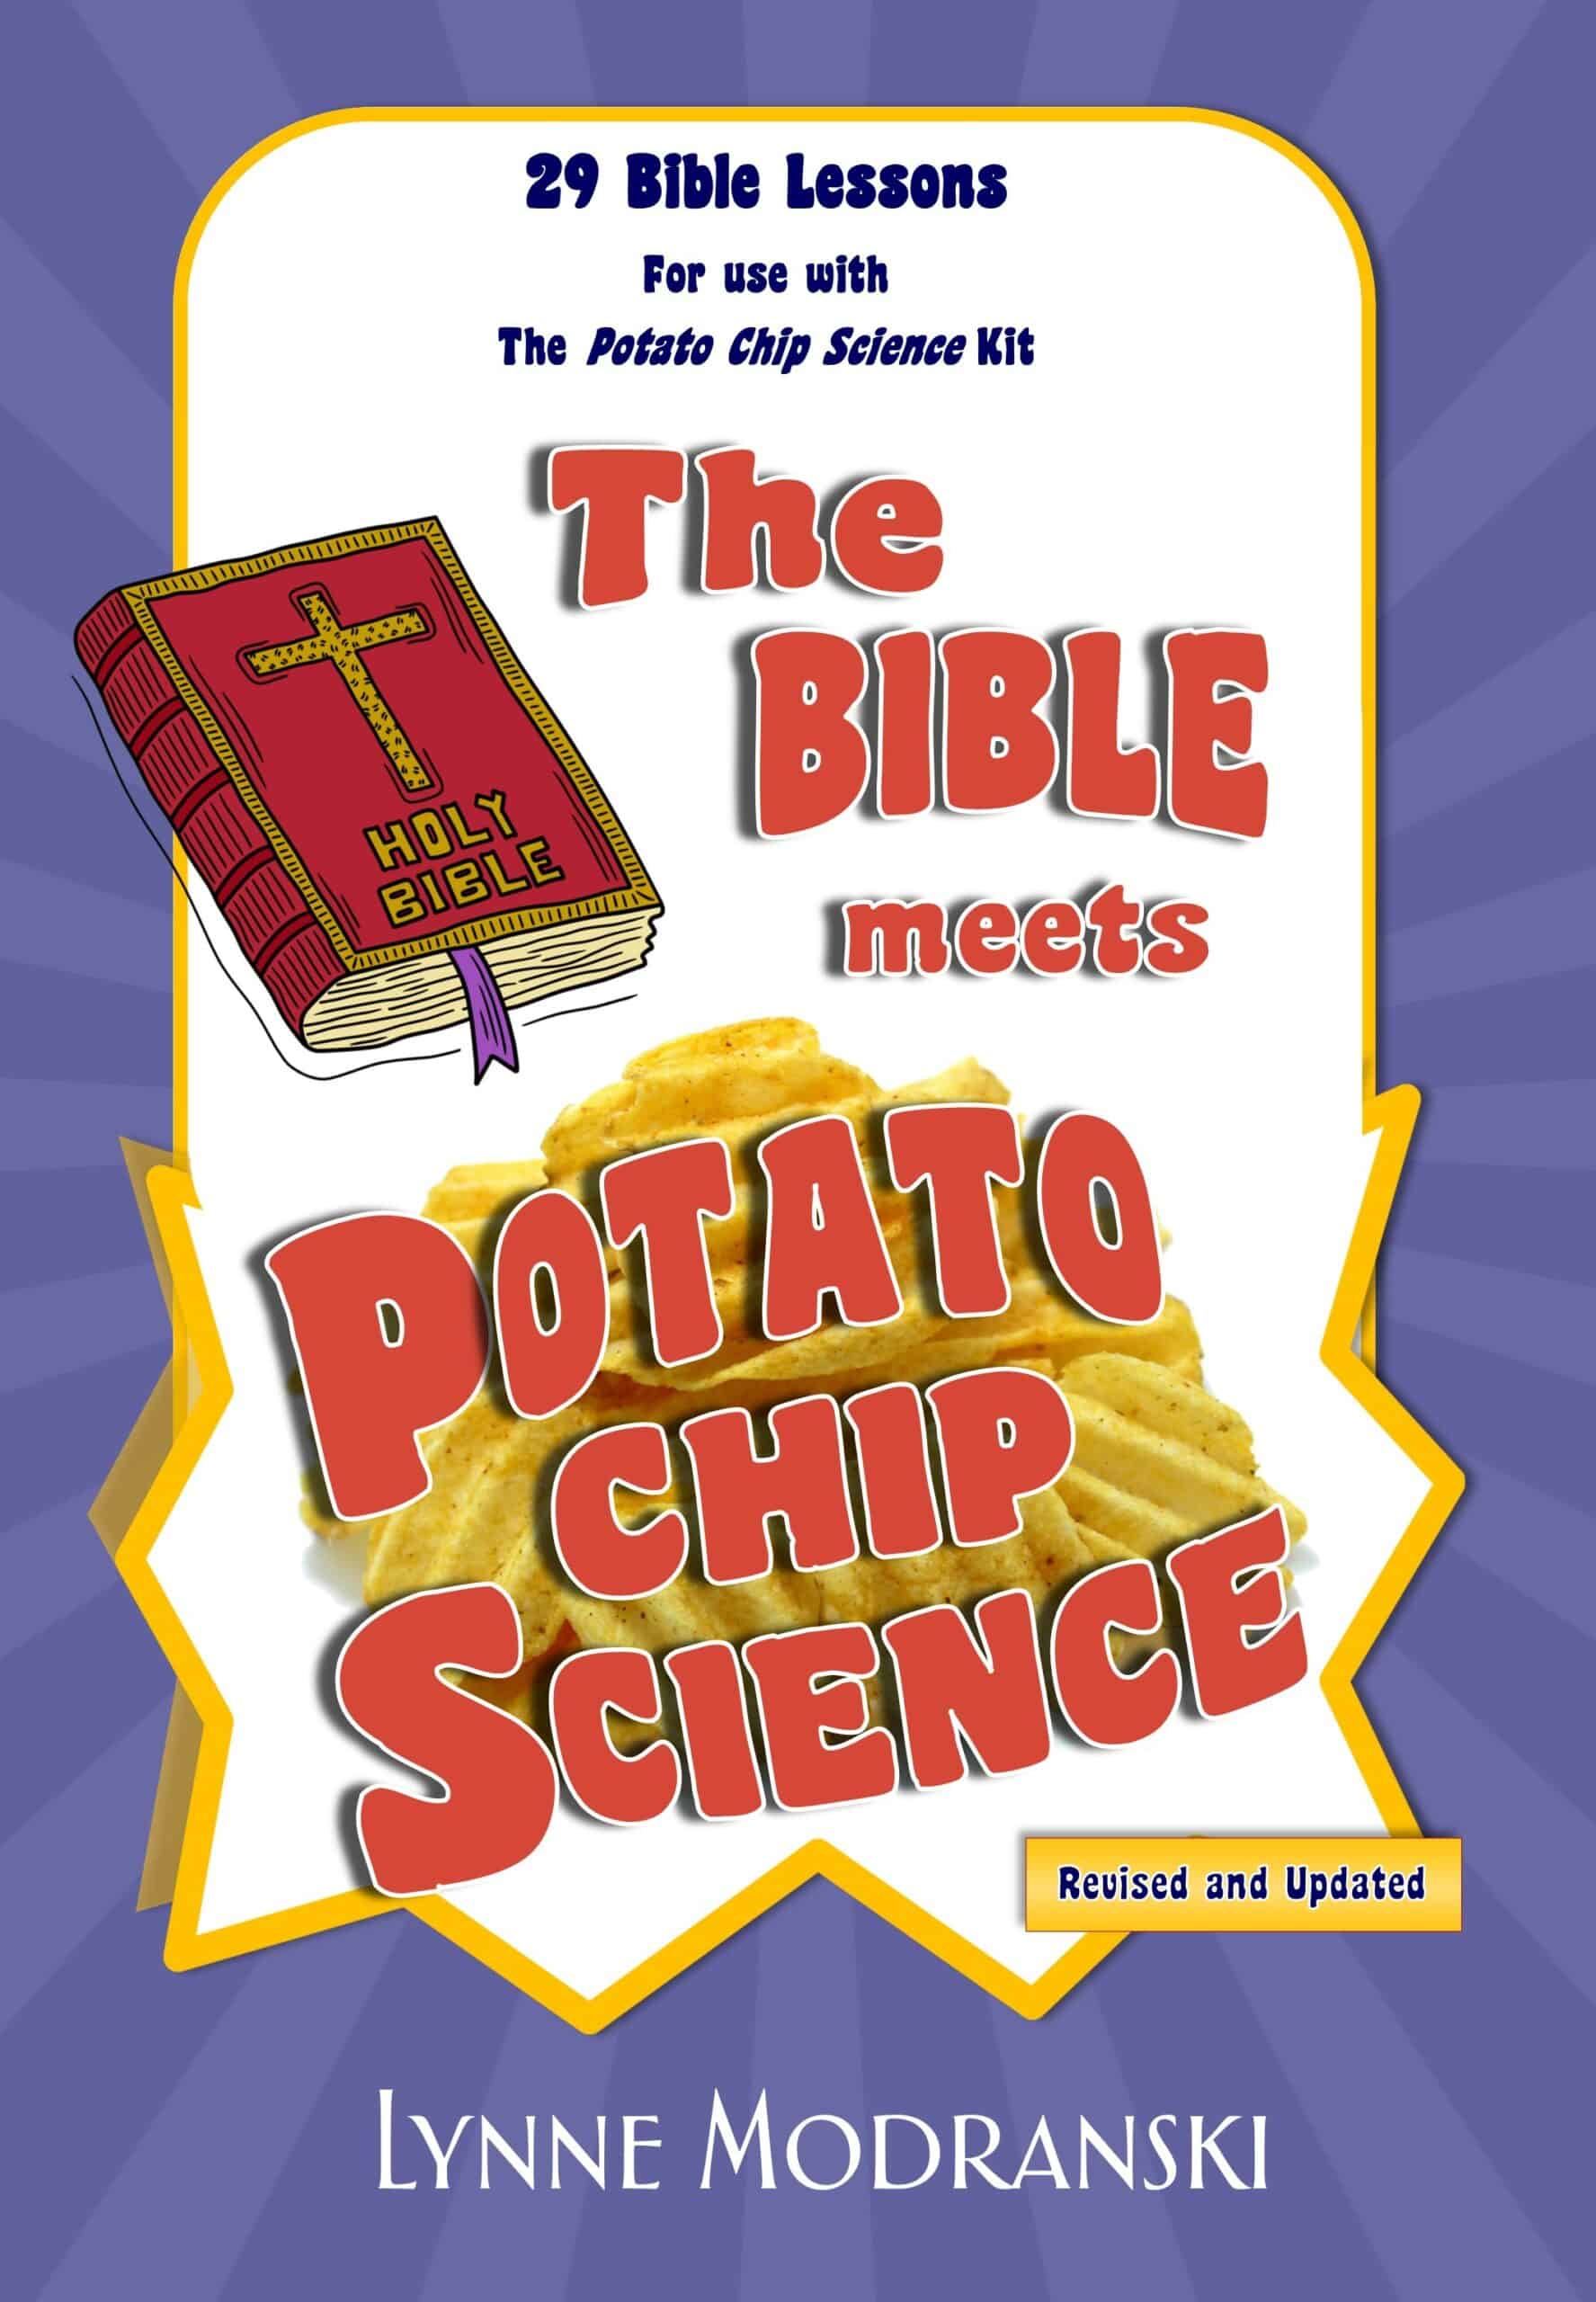 The Bible Meets Potato Chip Science Fun Bible Lessons for kids